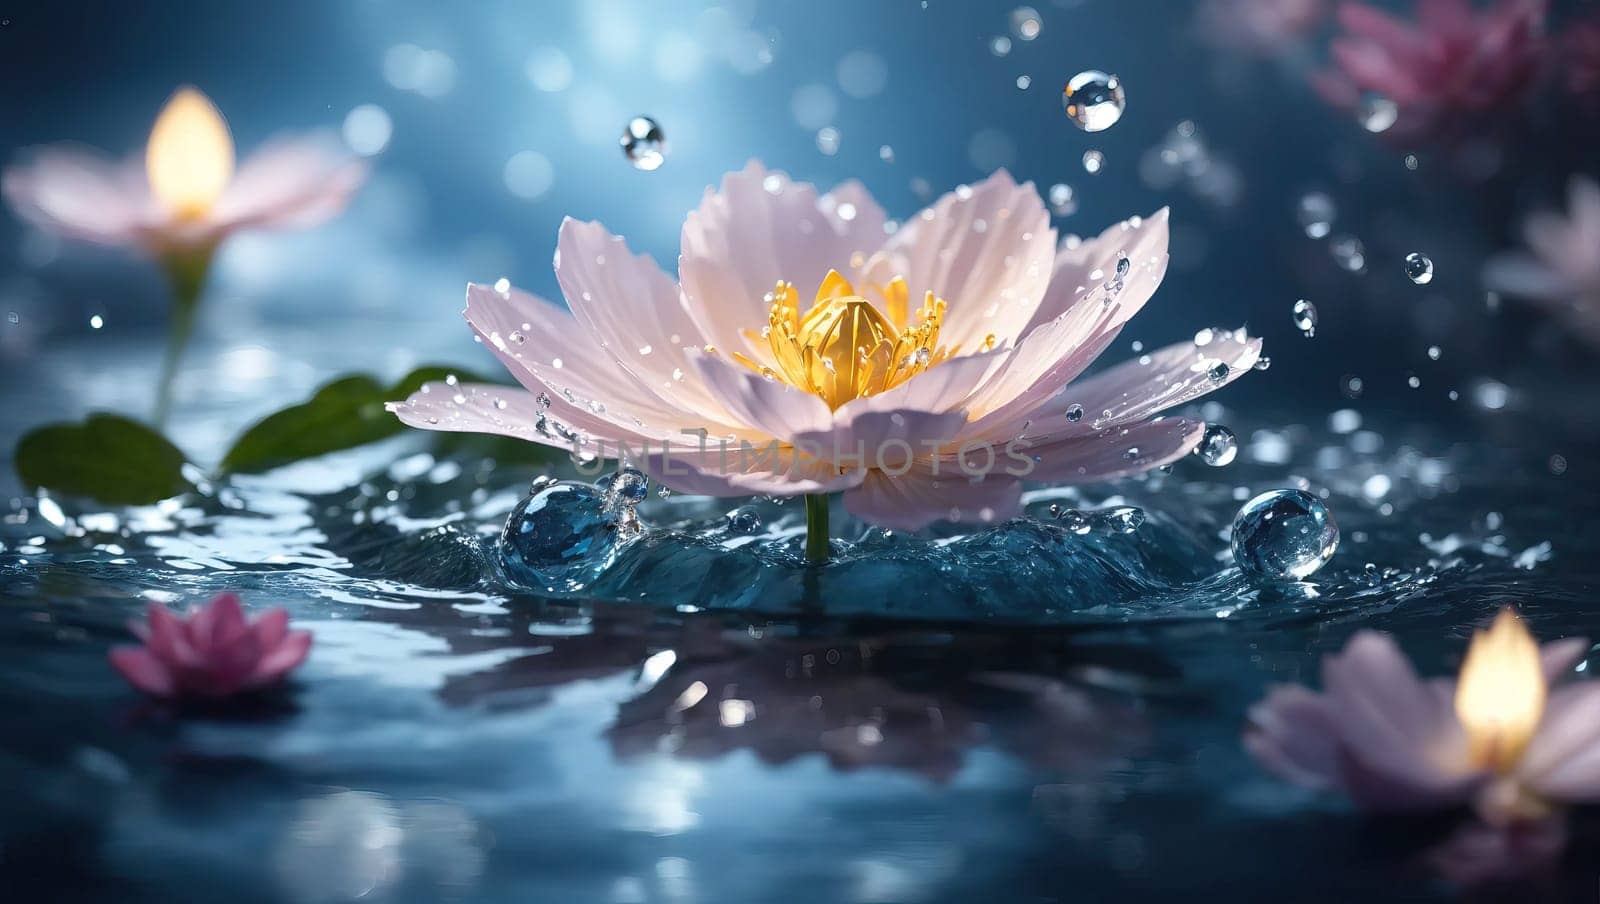 Water lily in the rain by applesstock